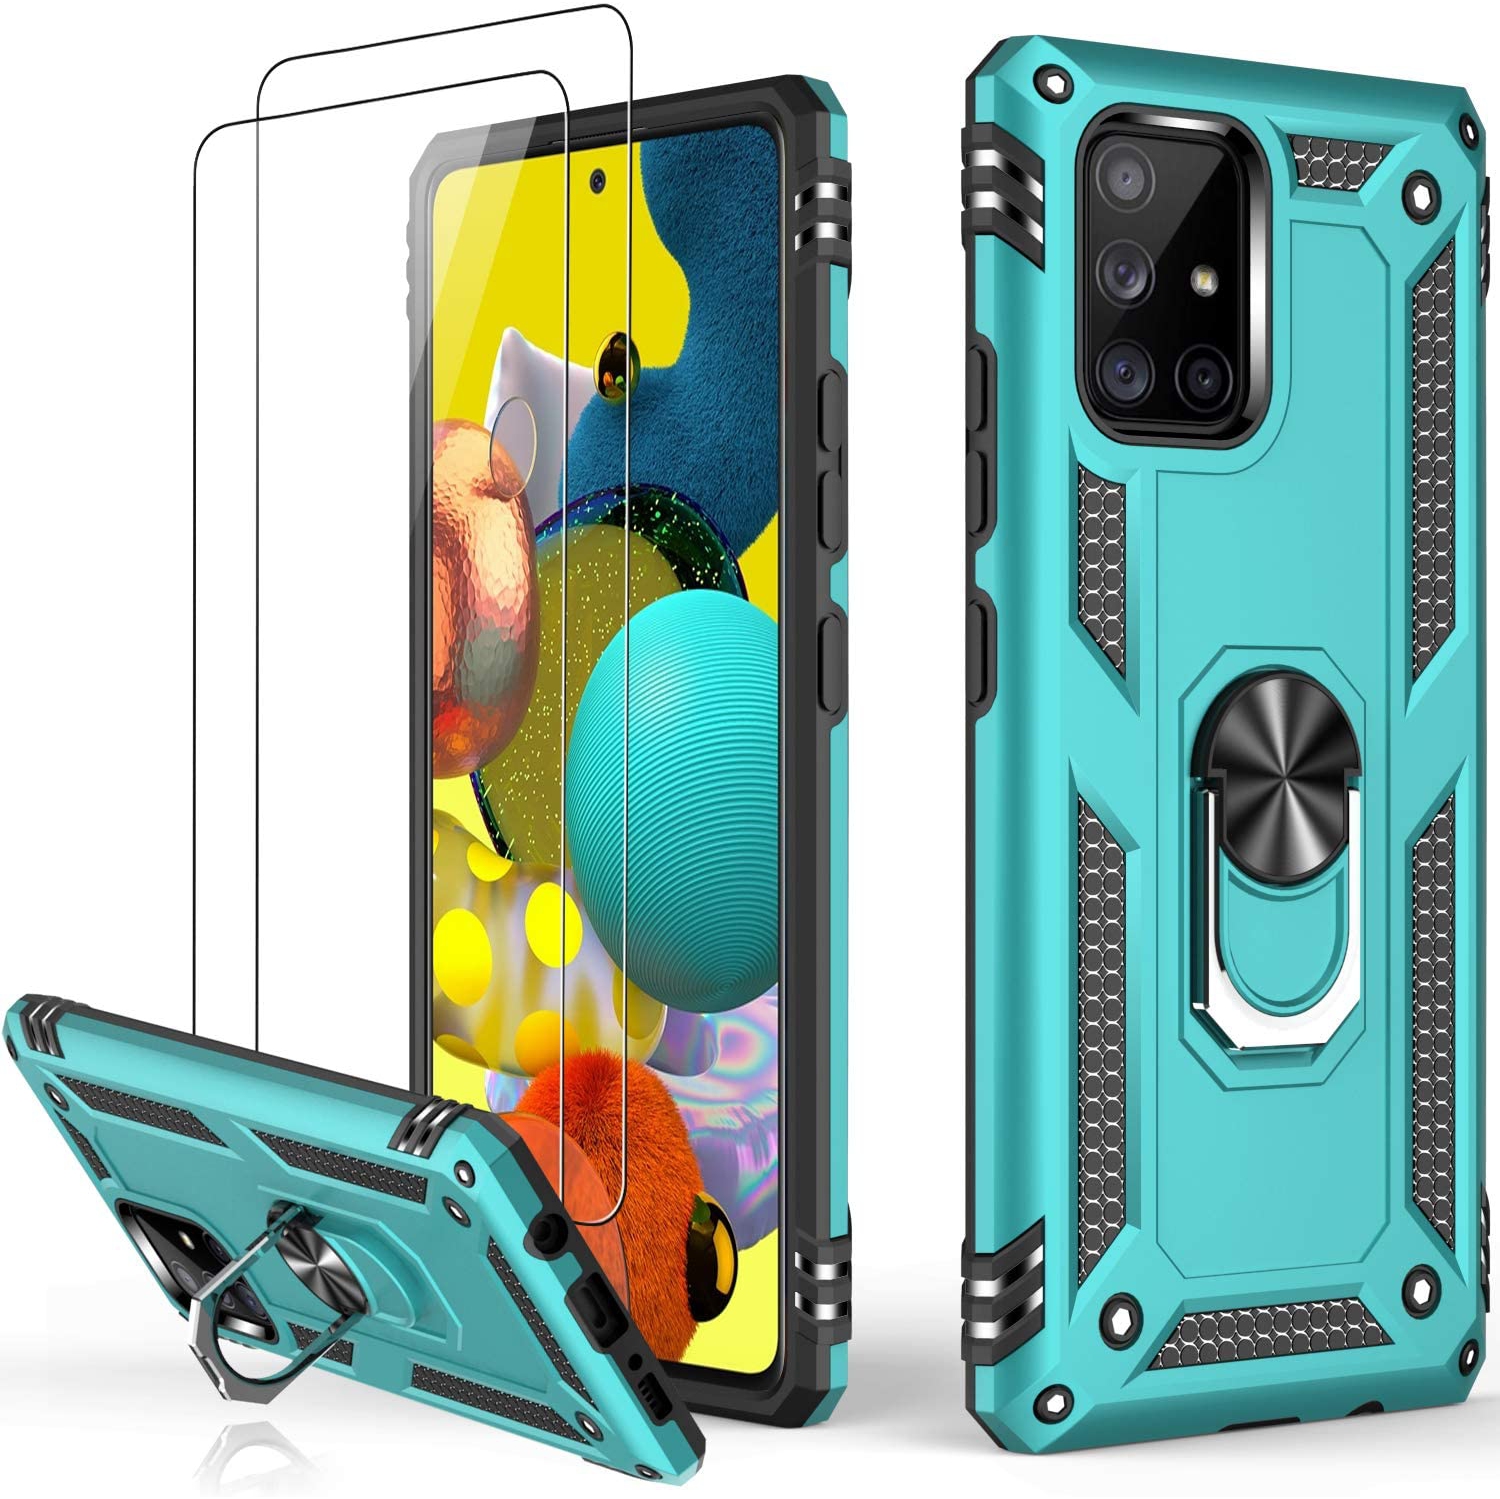 Galaxy A51 5G Case,Pass 16ft. Drop Tested Military Grade Cover with Magnetic Ring Kickstand Compatible with Car Mount Holder,Protective Phone Case for Samsung Galaxy A51 5G